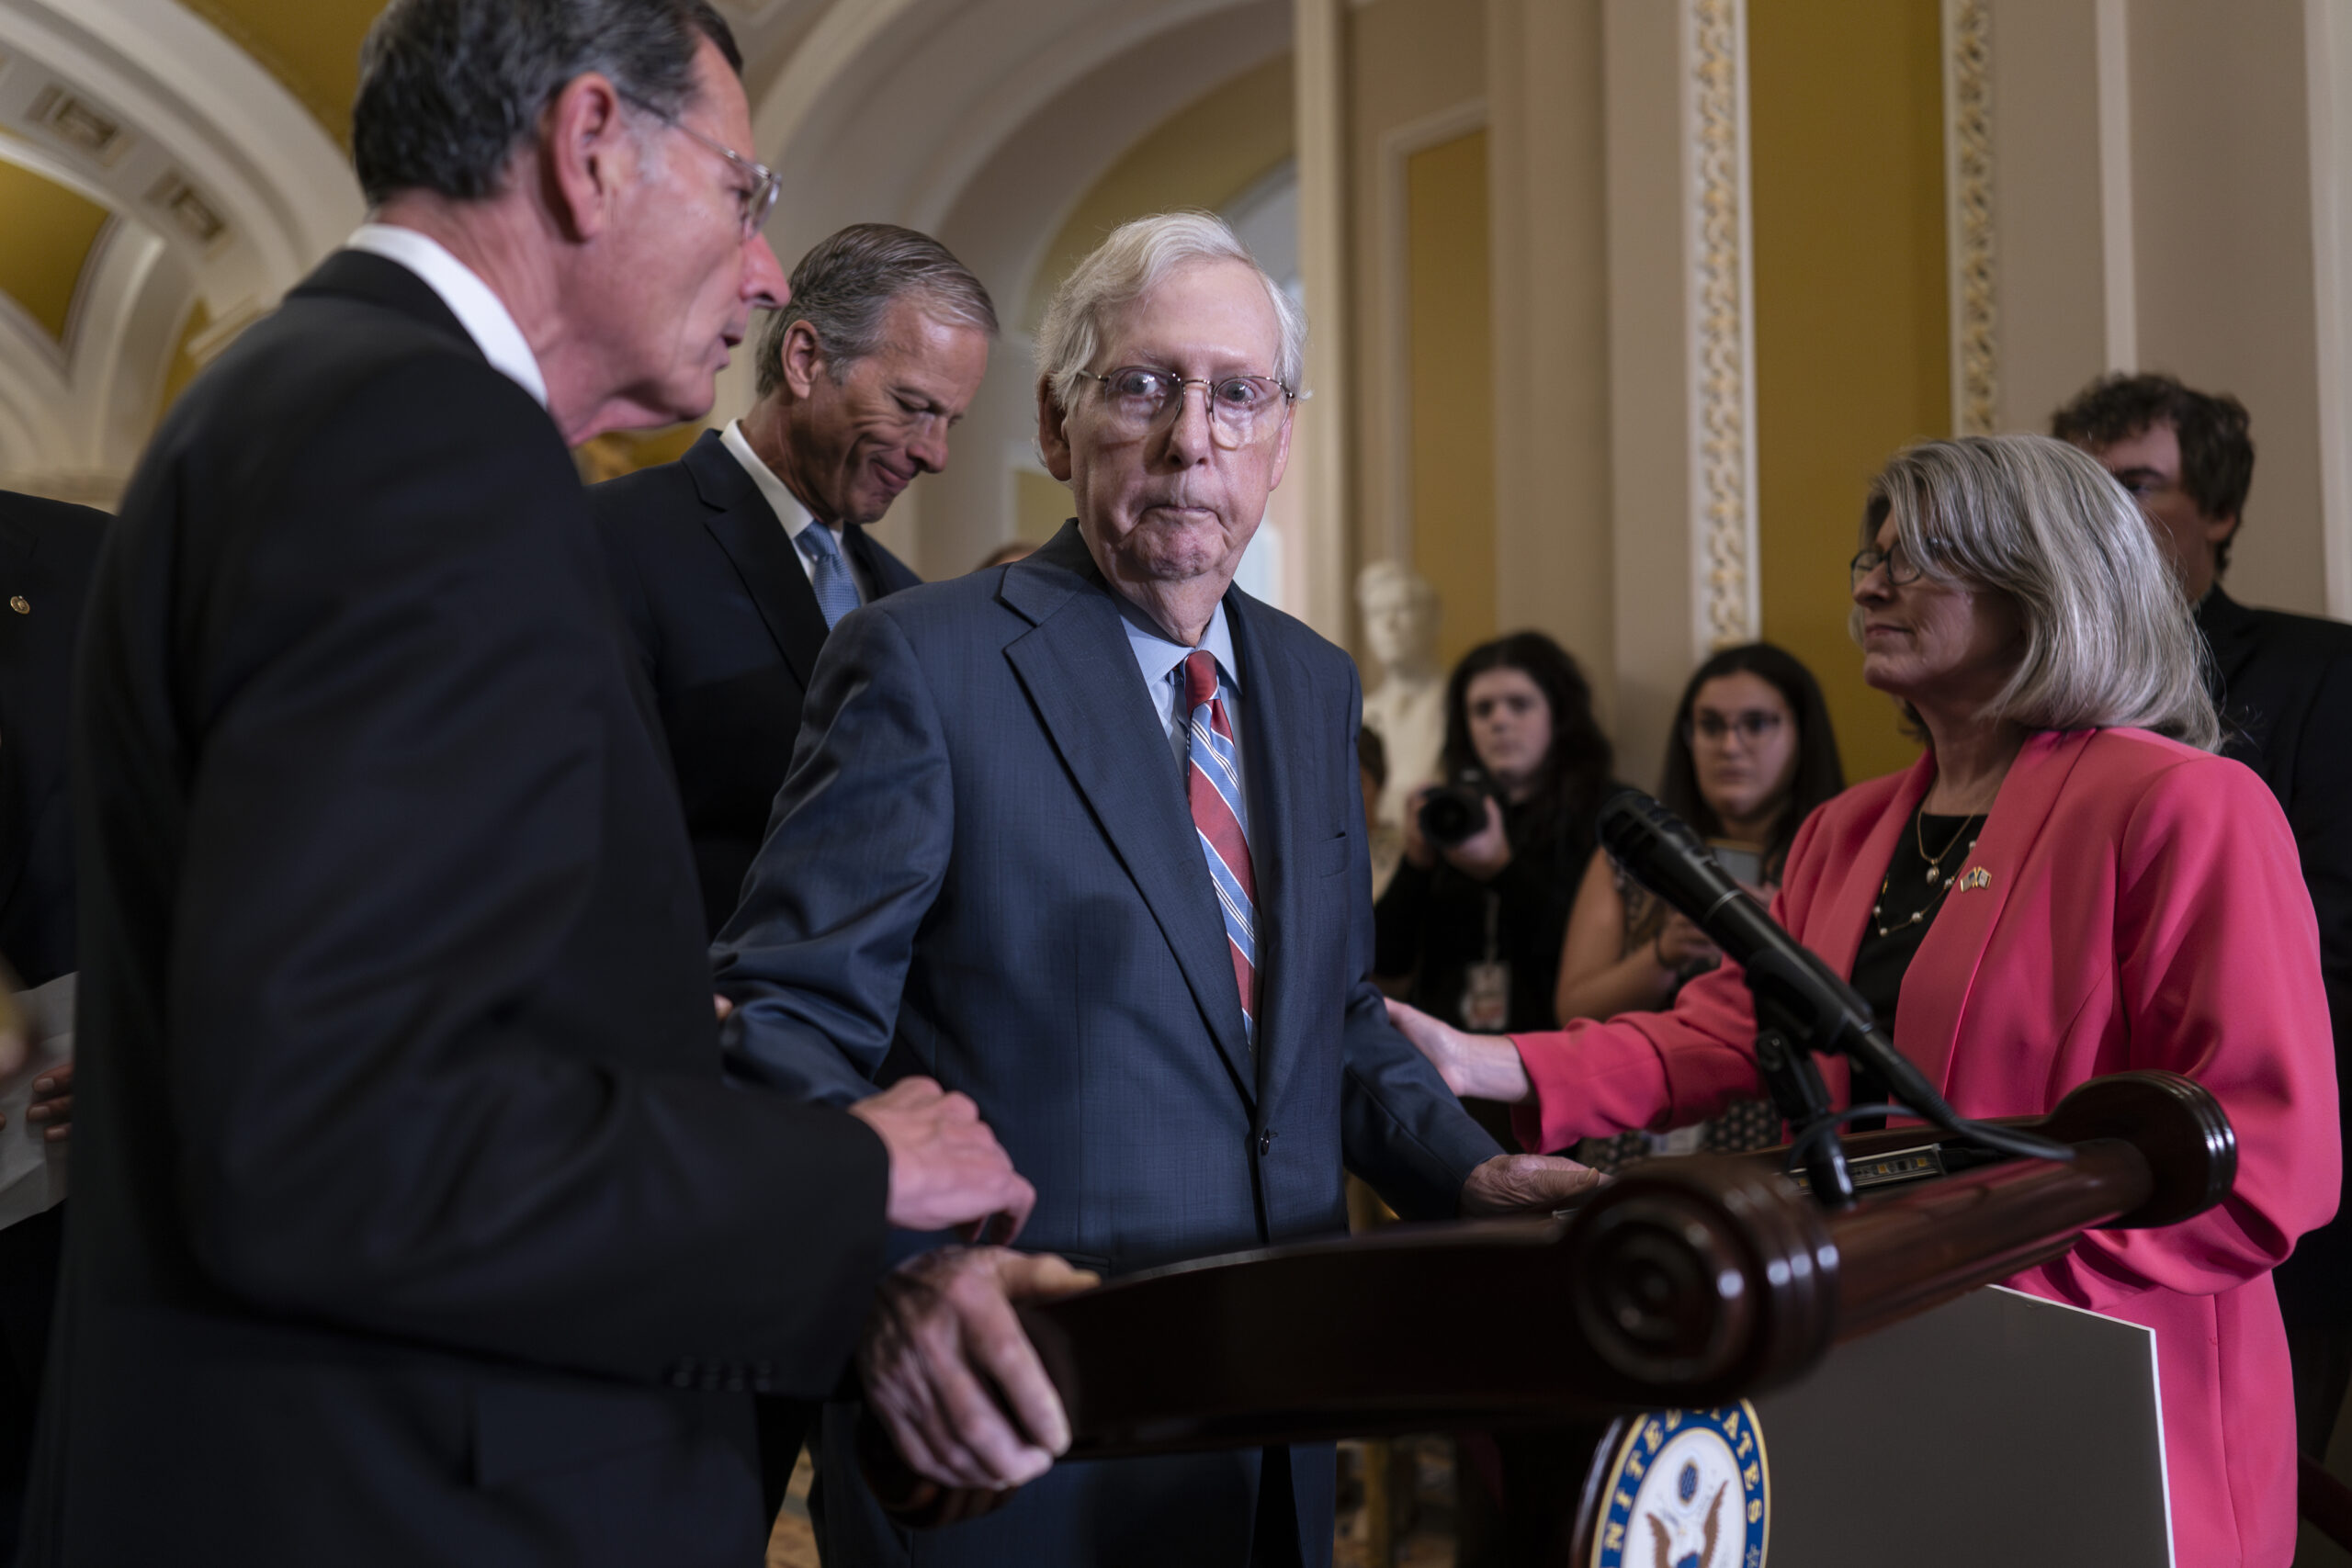 Senate Minority Leader Mitch McConnell, R-Ky., center, is helped by, from left, Sen. John Barrasso, R-Wyo., Sen. John Thune, R-S.D., and Sen. Joni Ernst, R-Iowa, after the 81-year-old GOP leader froze at the microphones as he arrived for a news conference, at the Capitol in Washington, Wednesday, July 26, 2023. McConnell went to his office for a few minutes and returned to speak with reporters.